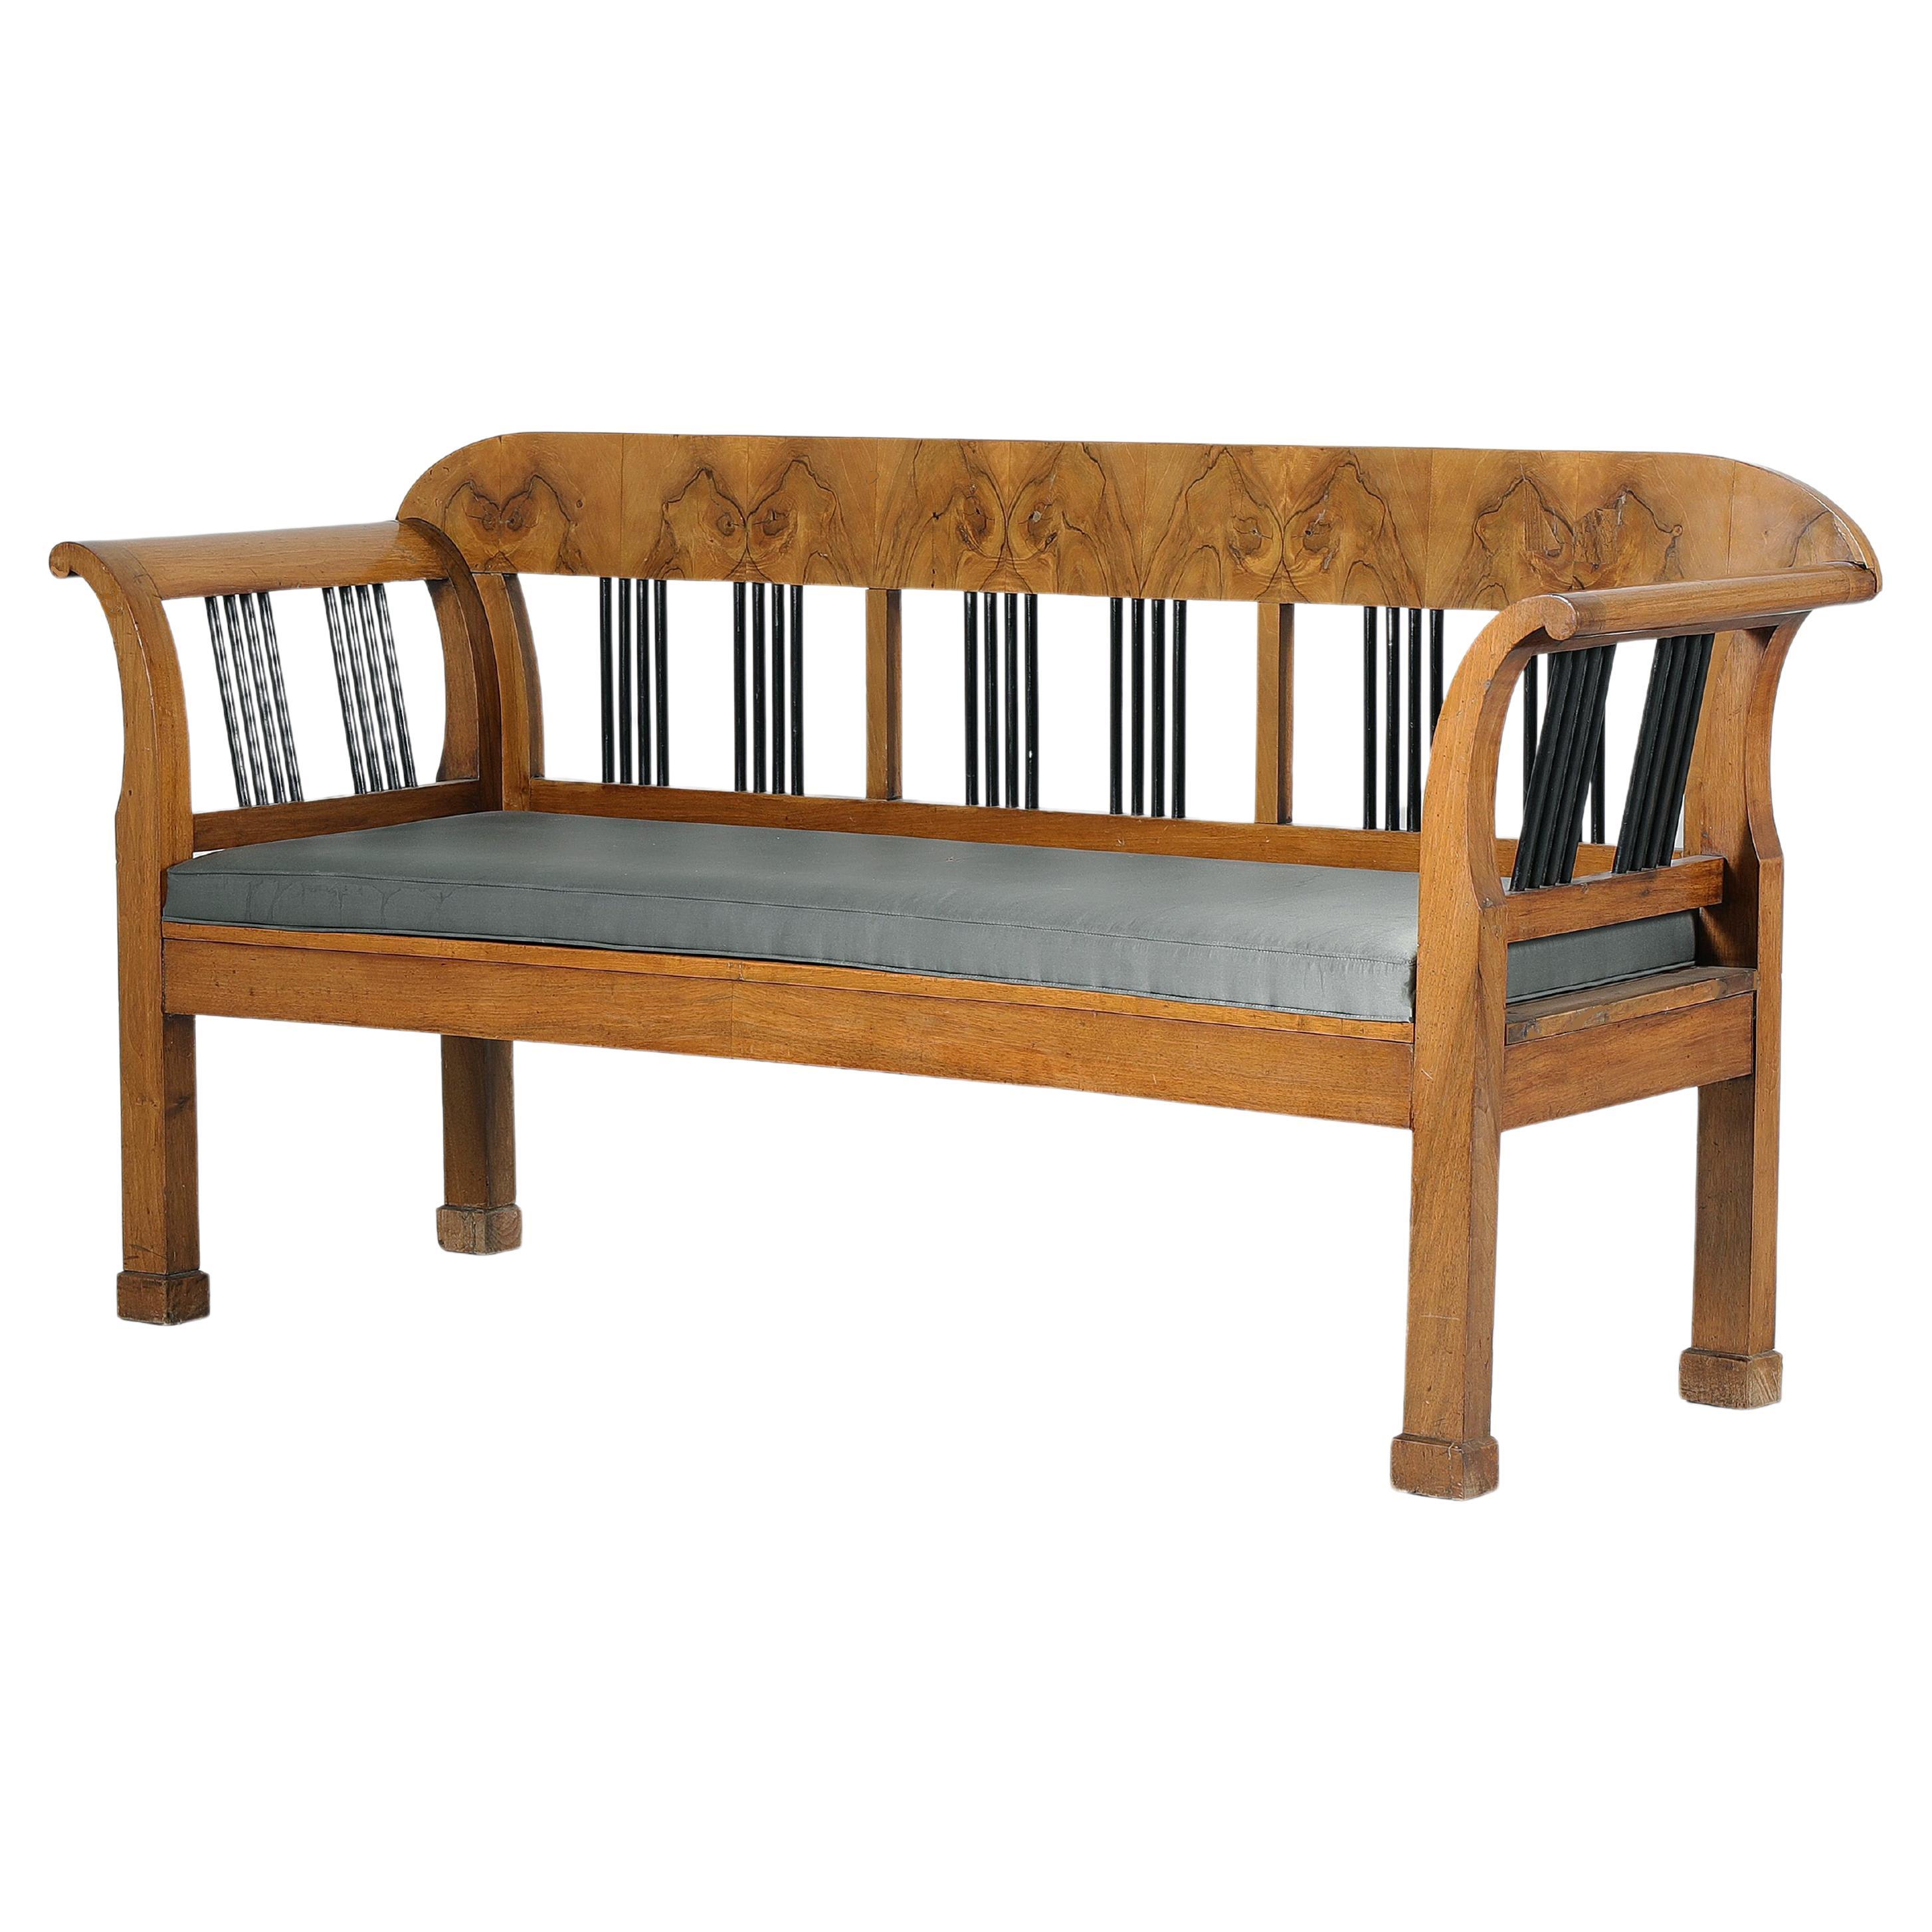 Hello,
This elegant Viennese Biedermeier bench was made in circa 1825.

Viennese Biedermeier pieces are distinguished by their sophisticated proportions, rare and refined design, excellent craftsmanship and continue to have a great influence on